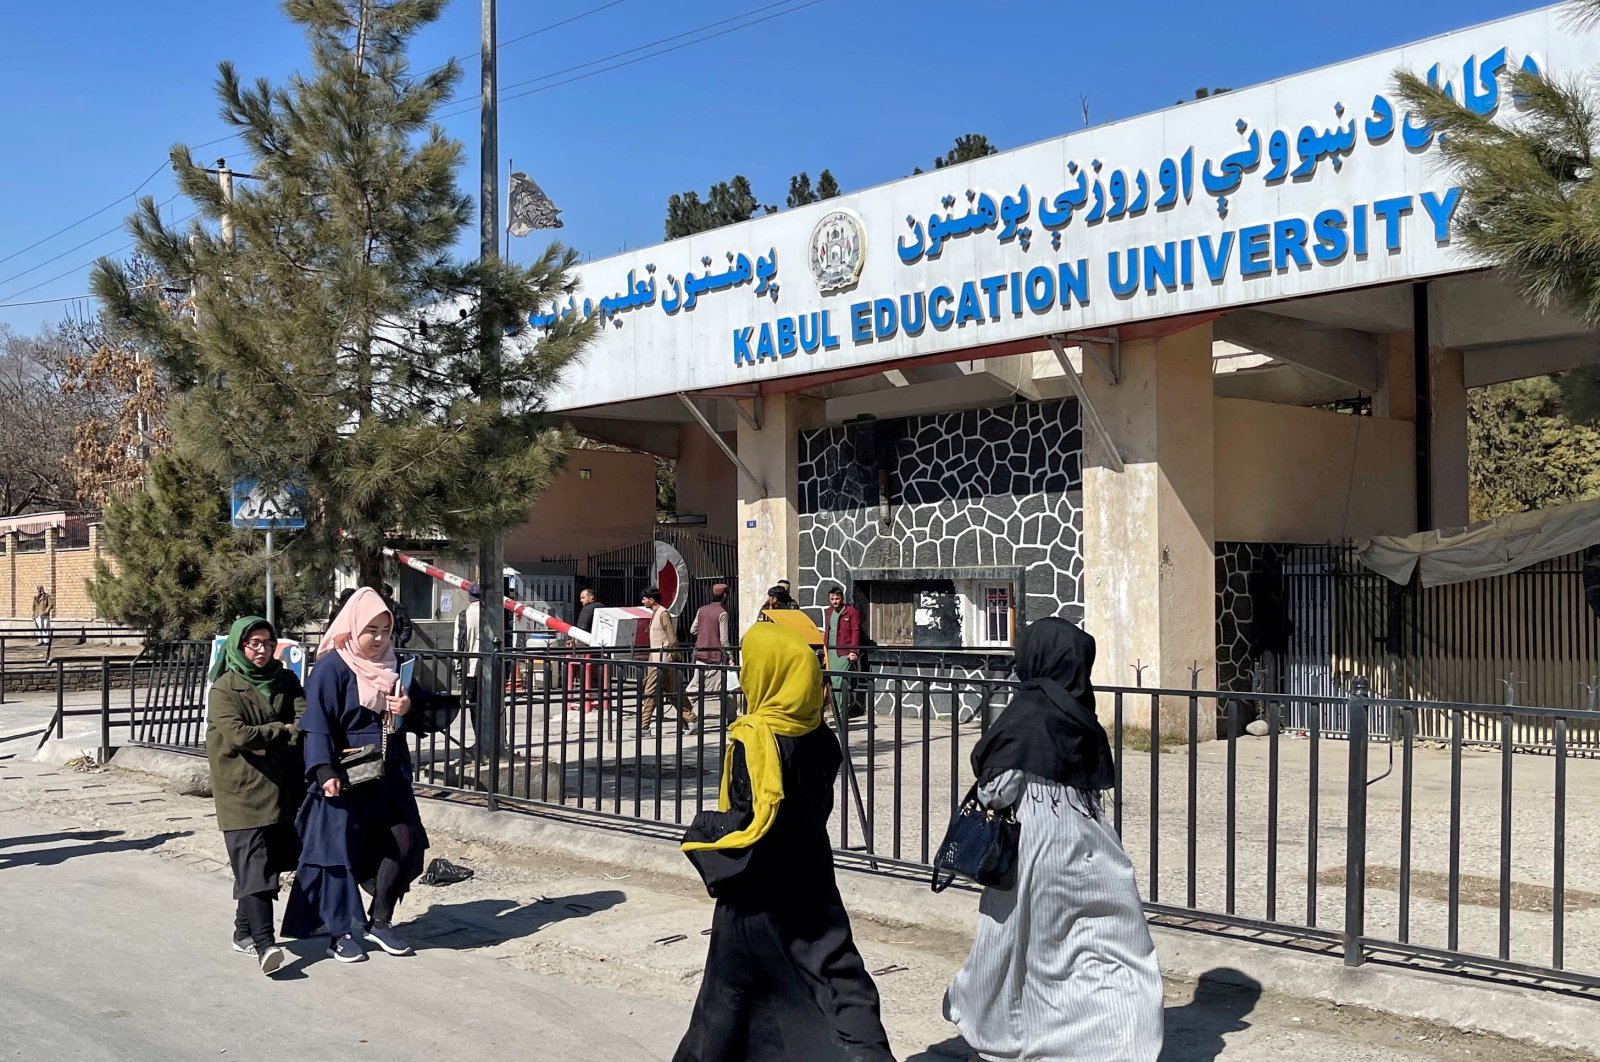 Female students walk in front of the Kabul Education University in Kabul, Afghanistan, Feb. 26, 2022. (Reuters File Photo)